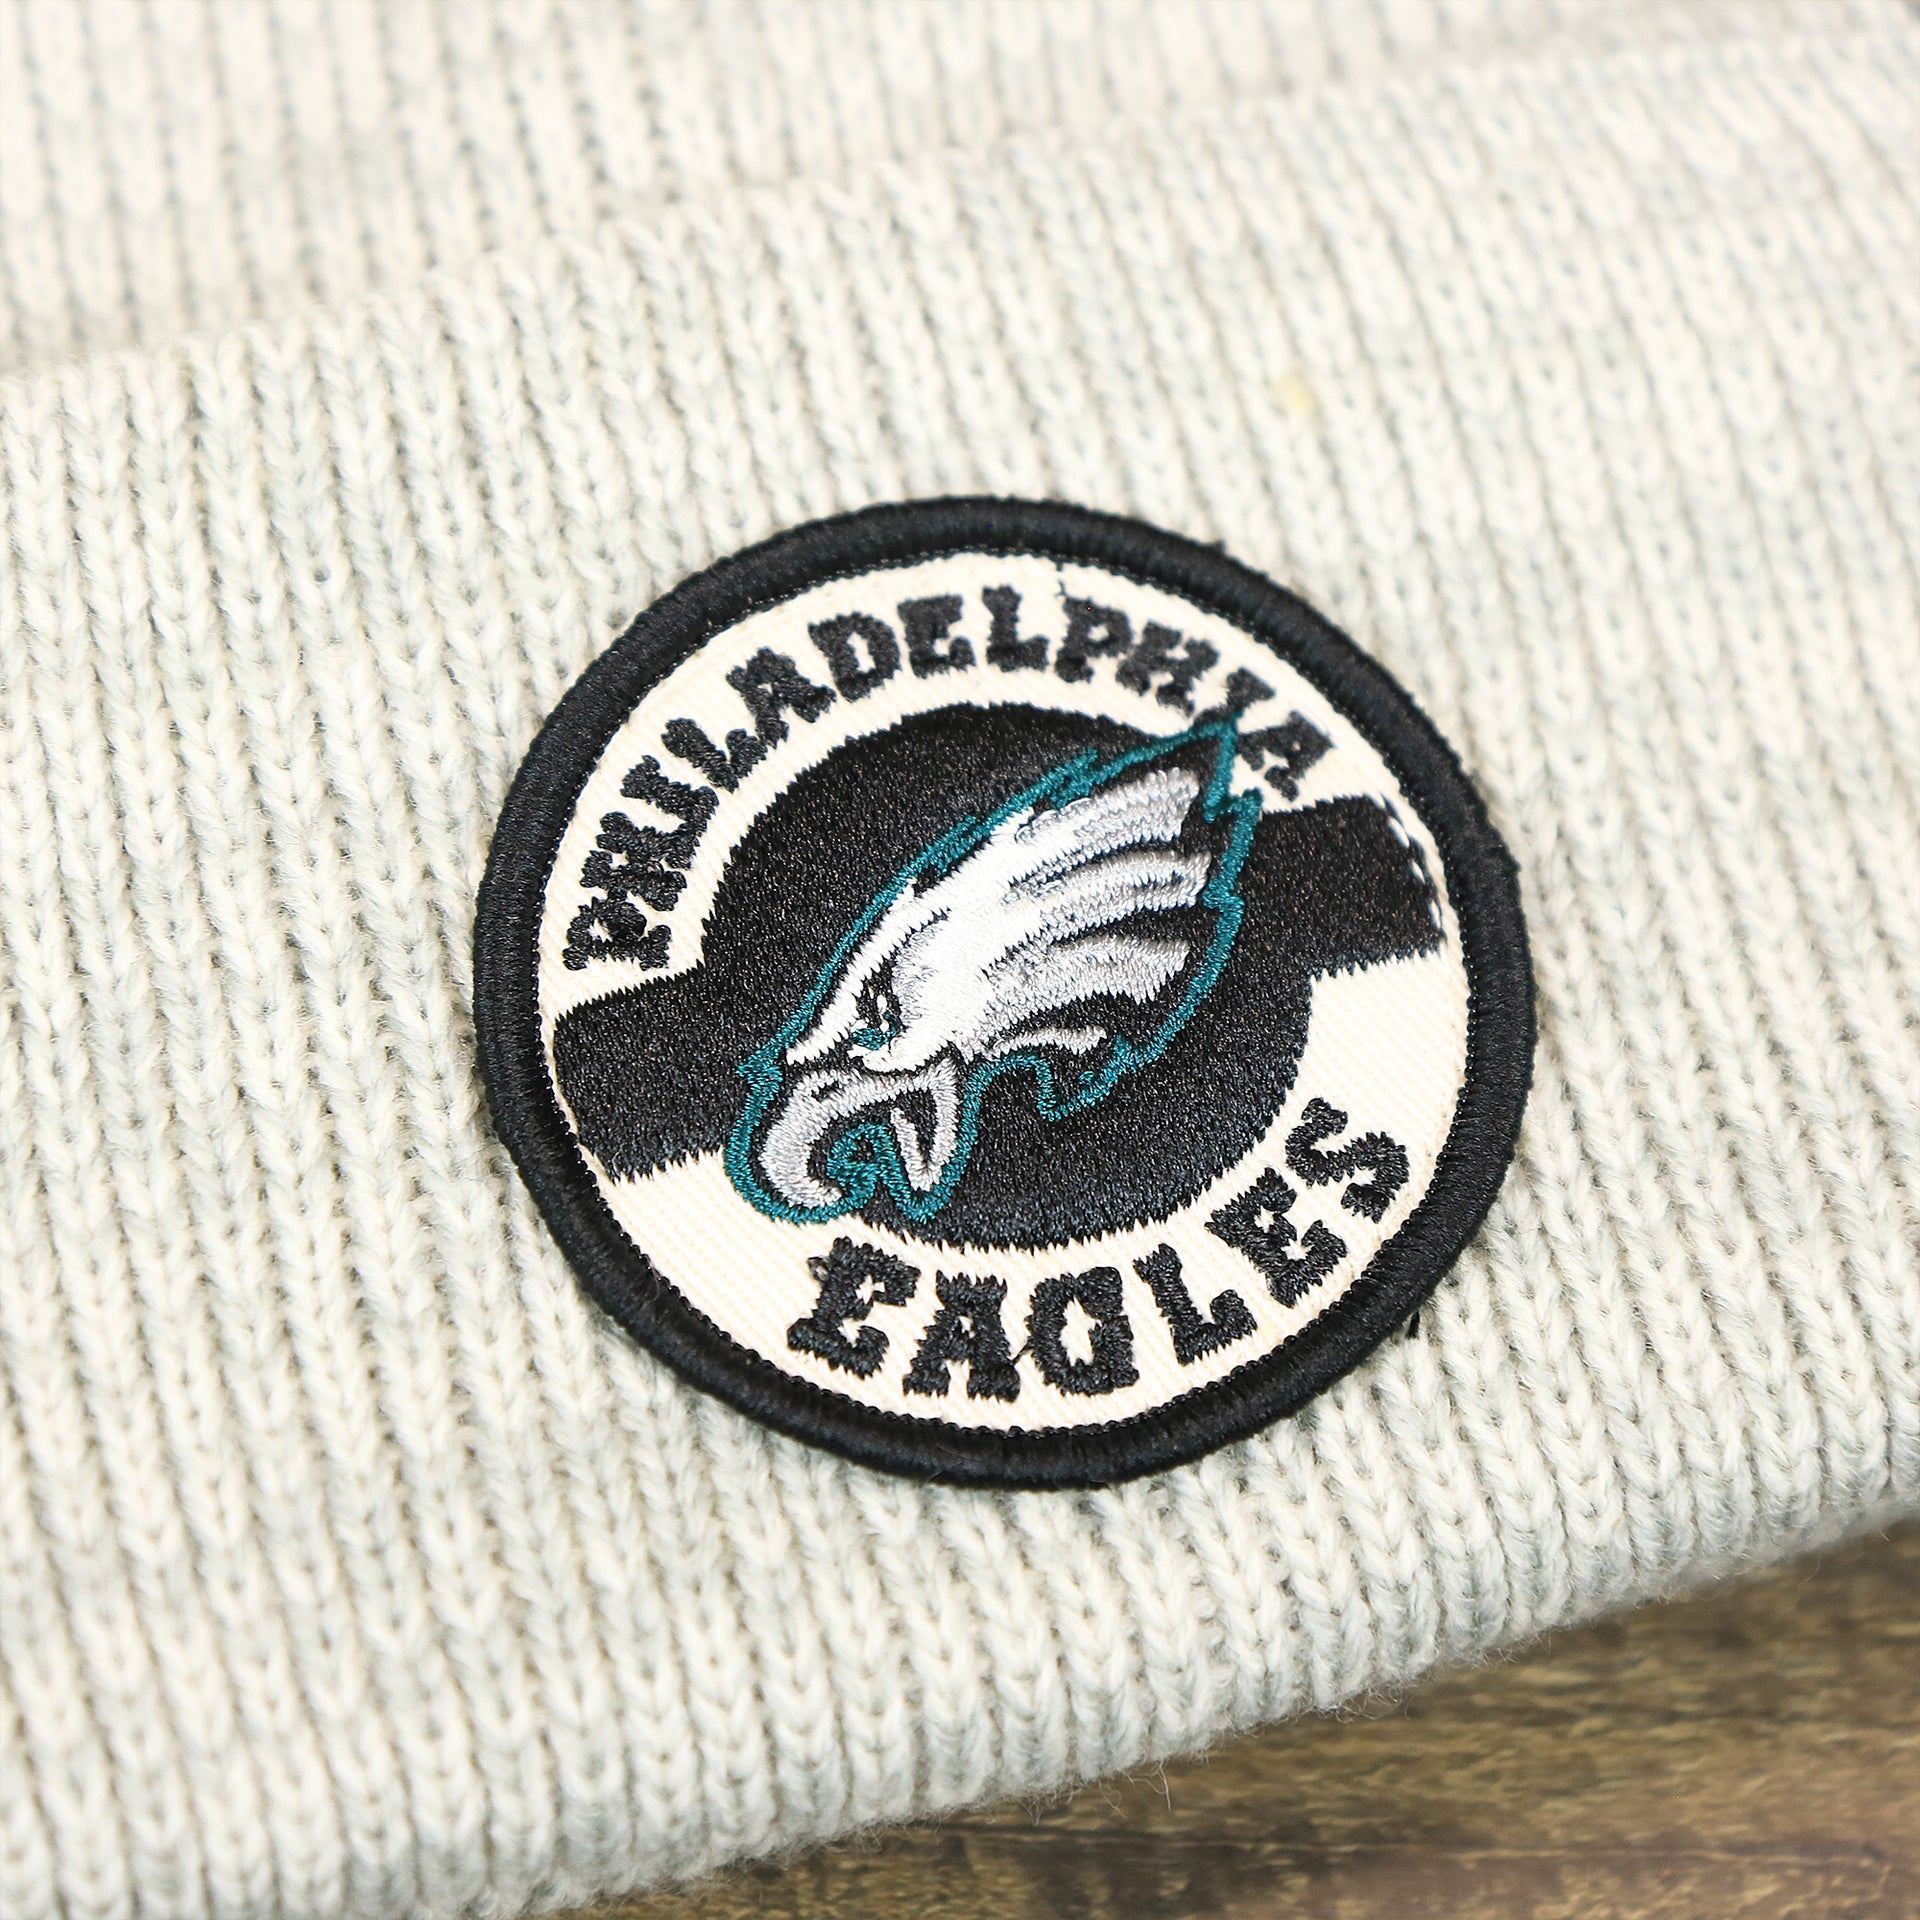 The Eagles Patch on the Philadelphia Eagles Patch Cuffed Winter Beanie | Heather Gray Winter Beanie